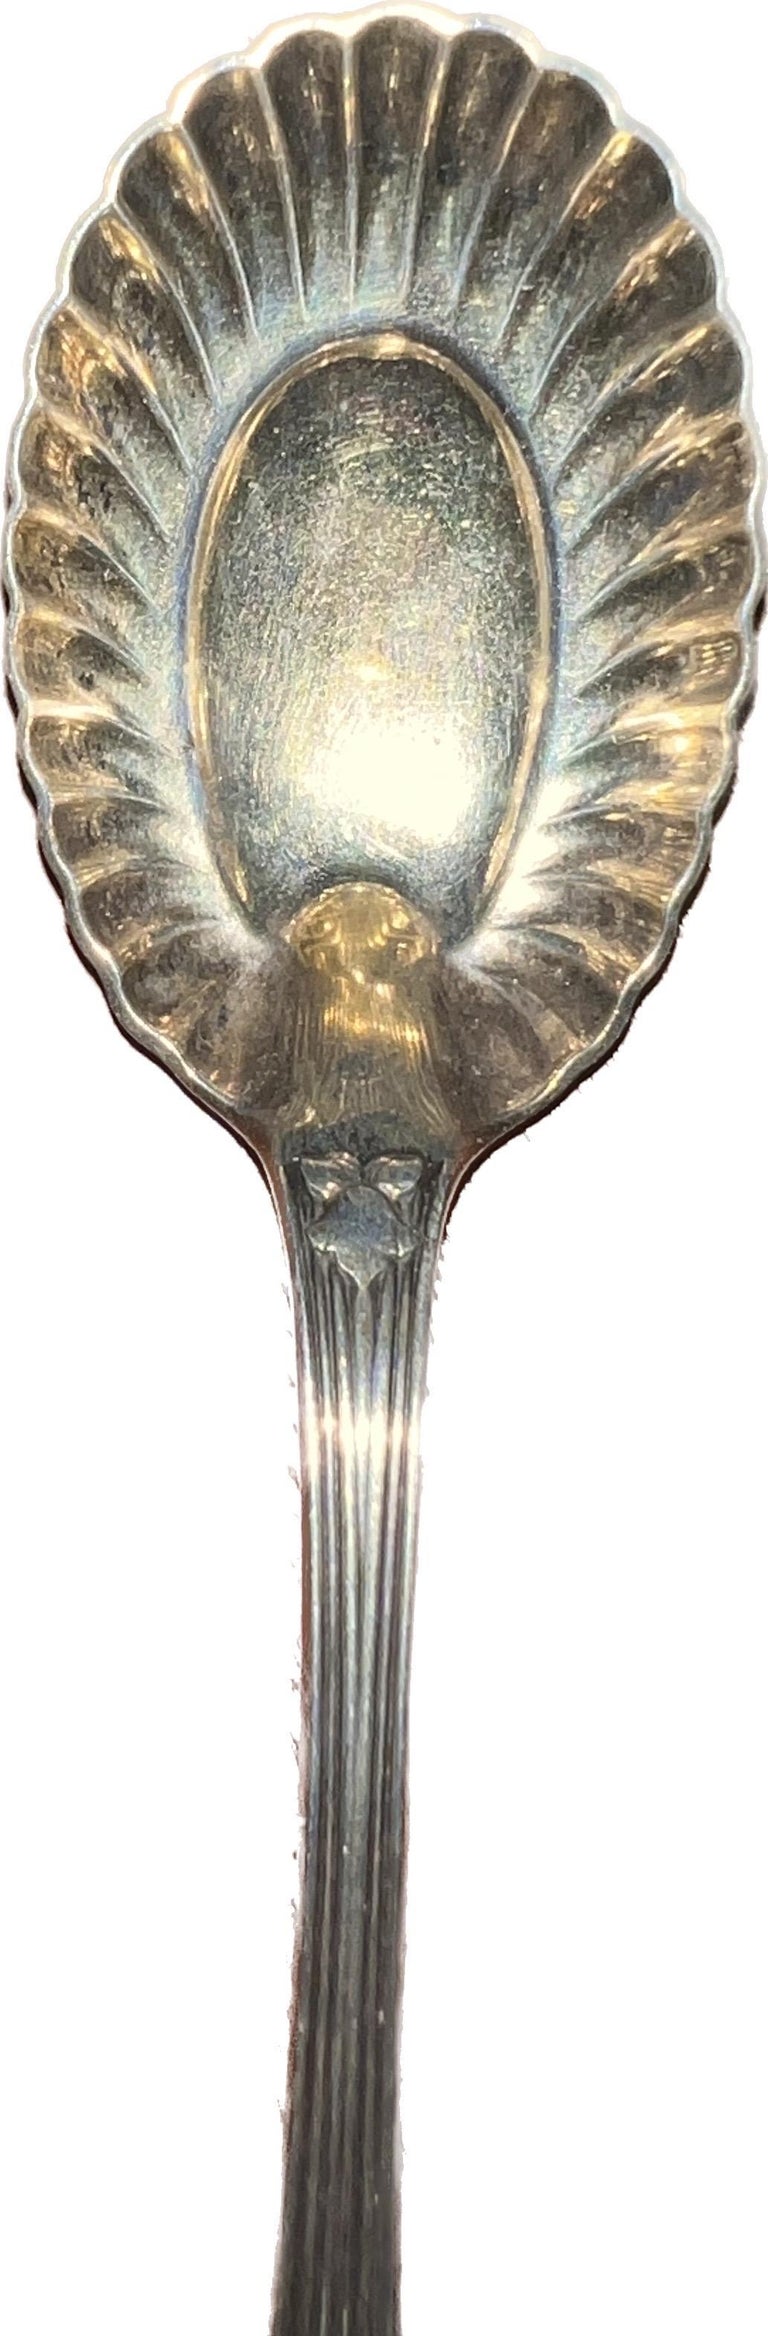 American Tiffany & Co Late 19th C. Sterling Silver Goldwash Japanese Audubon Berry Spoon For Sale